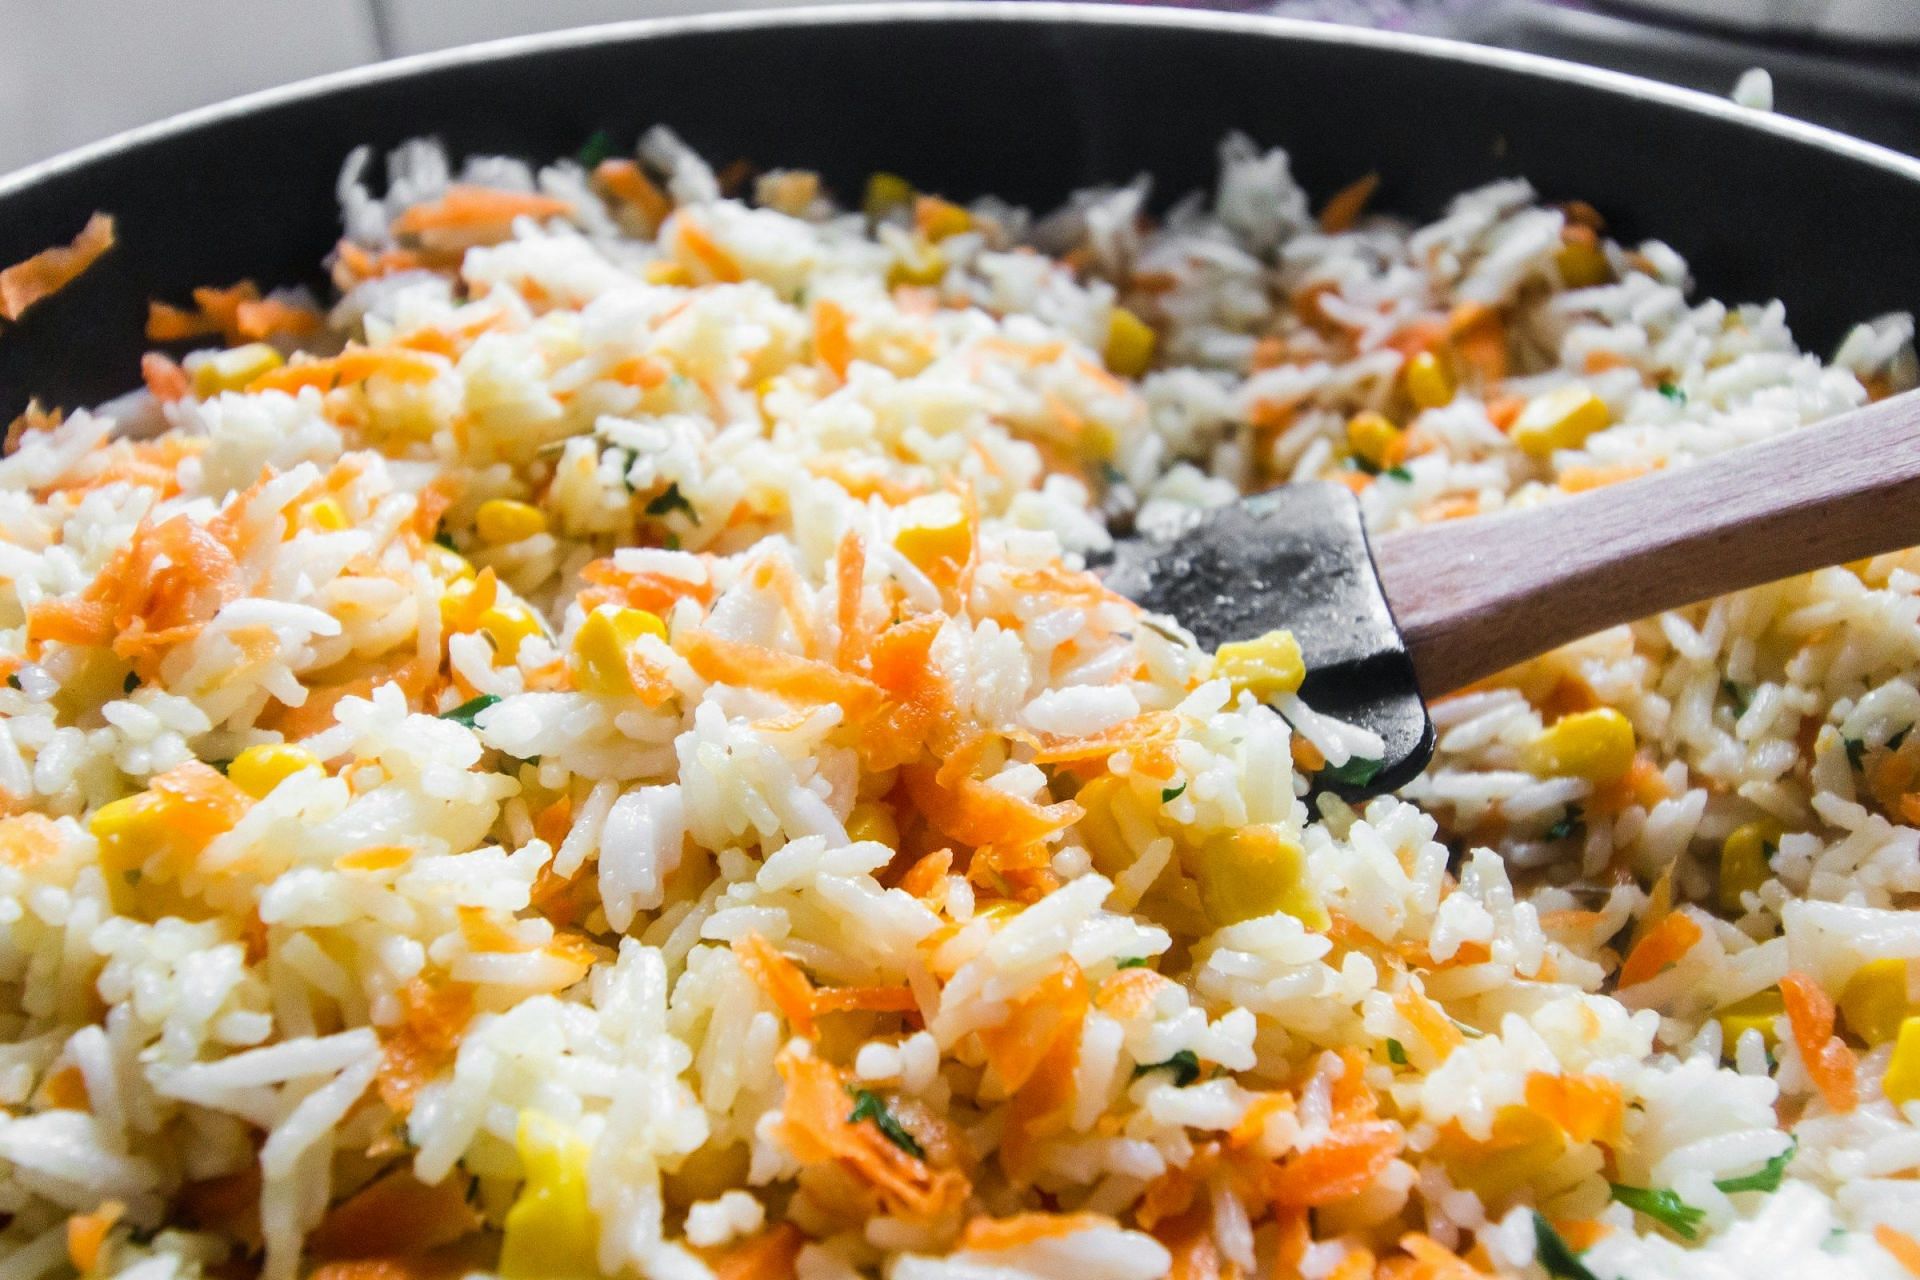 Rice hack for weight loss (Image via Unsplash/Louis Hansel)